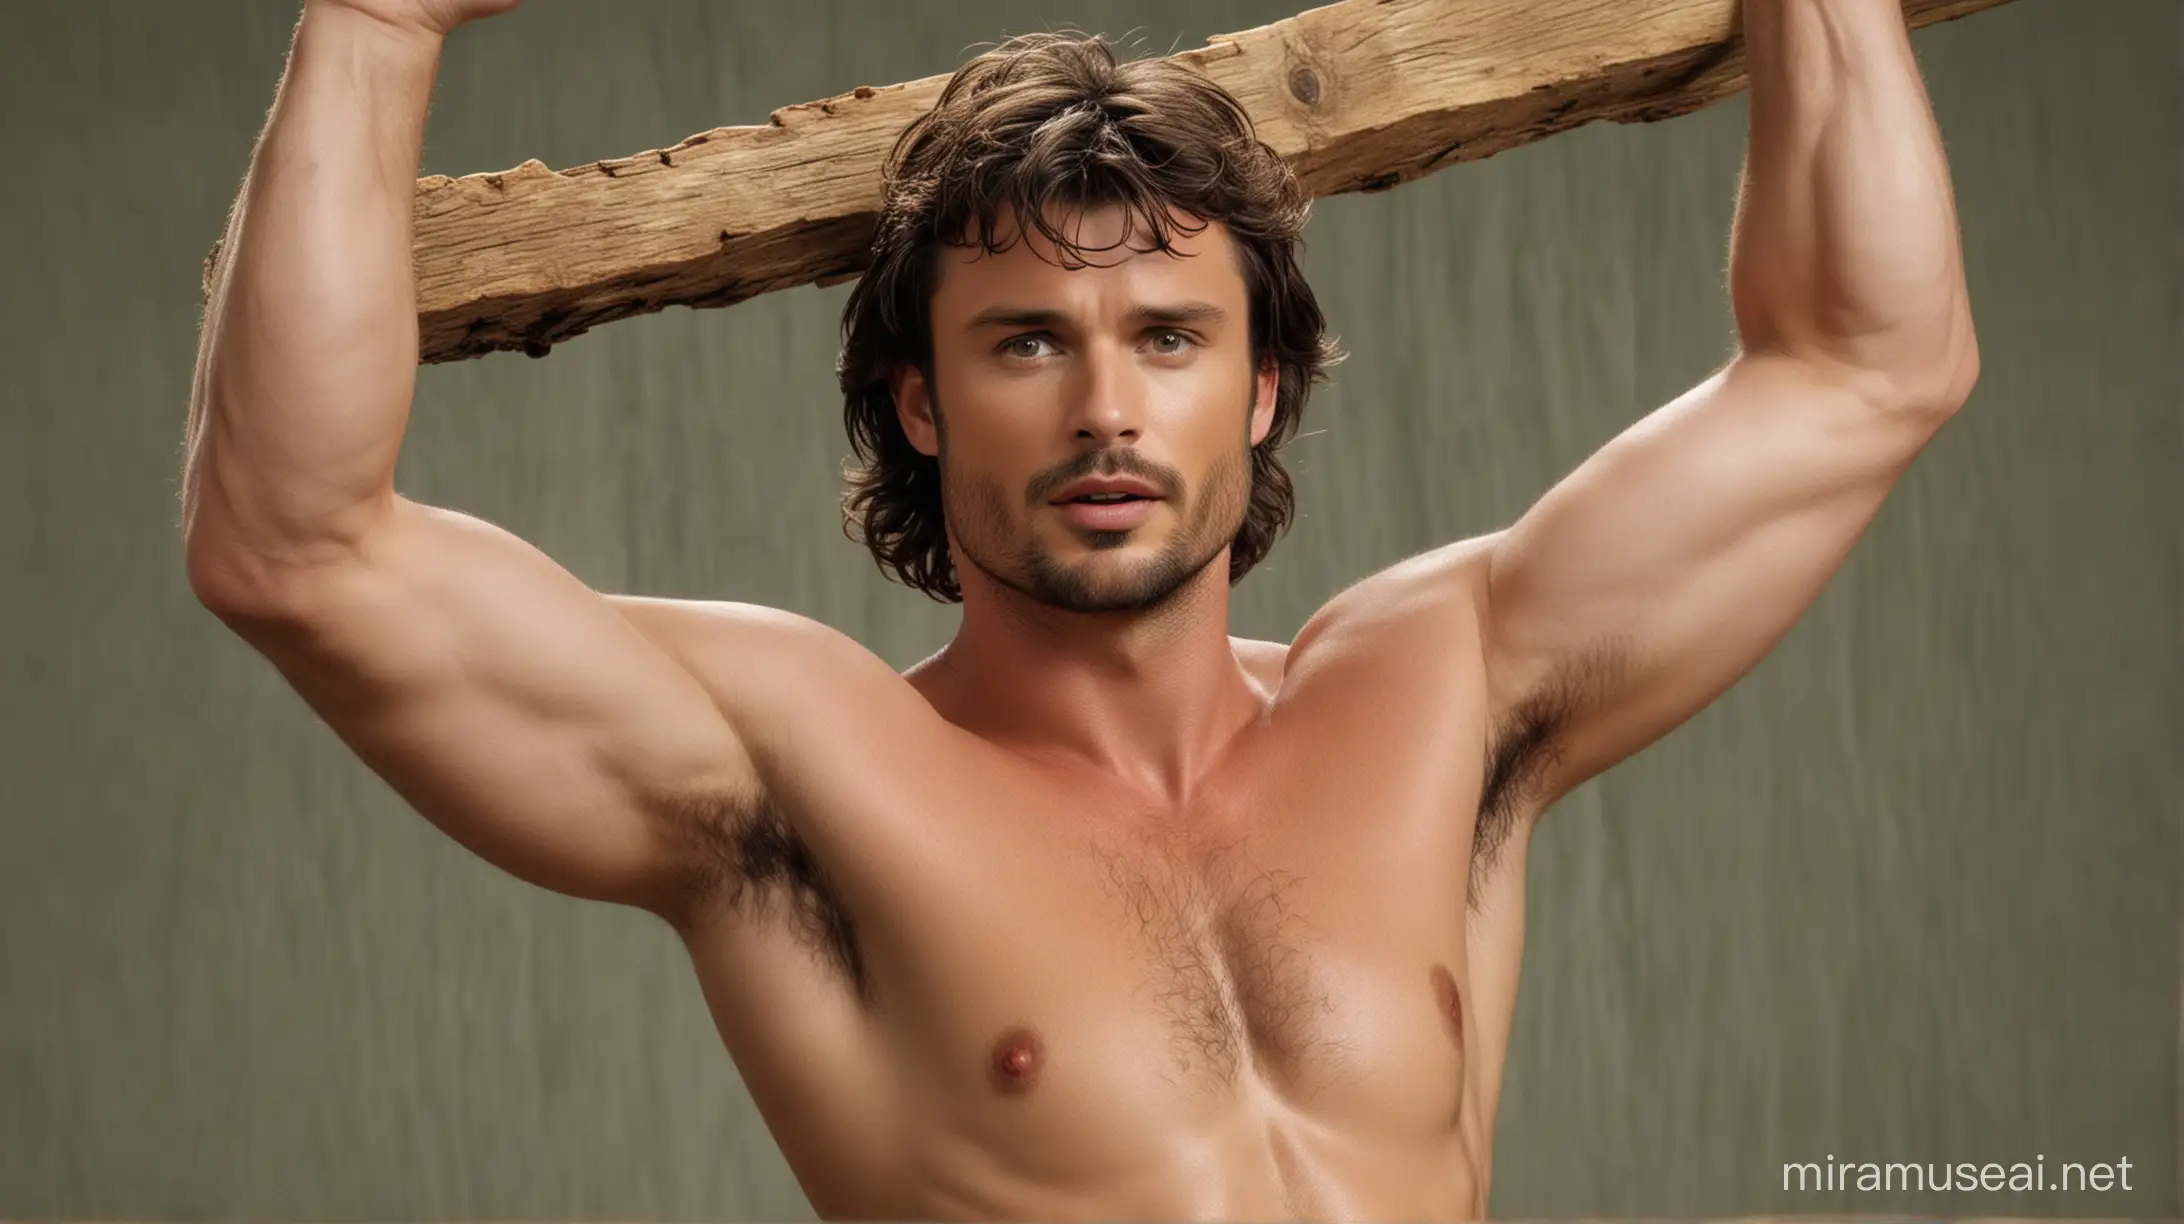 Woodwork. Actor Tom Welling, 35 years old. Welling, green eyes, shirtless, very hairy chest, raising both open arms above his head, lifting a wooden board above his head, showing very hairy armpits, serious look, bearded, very hairy body and chest.